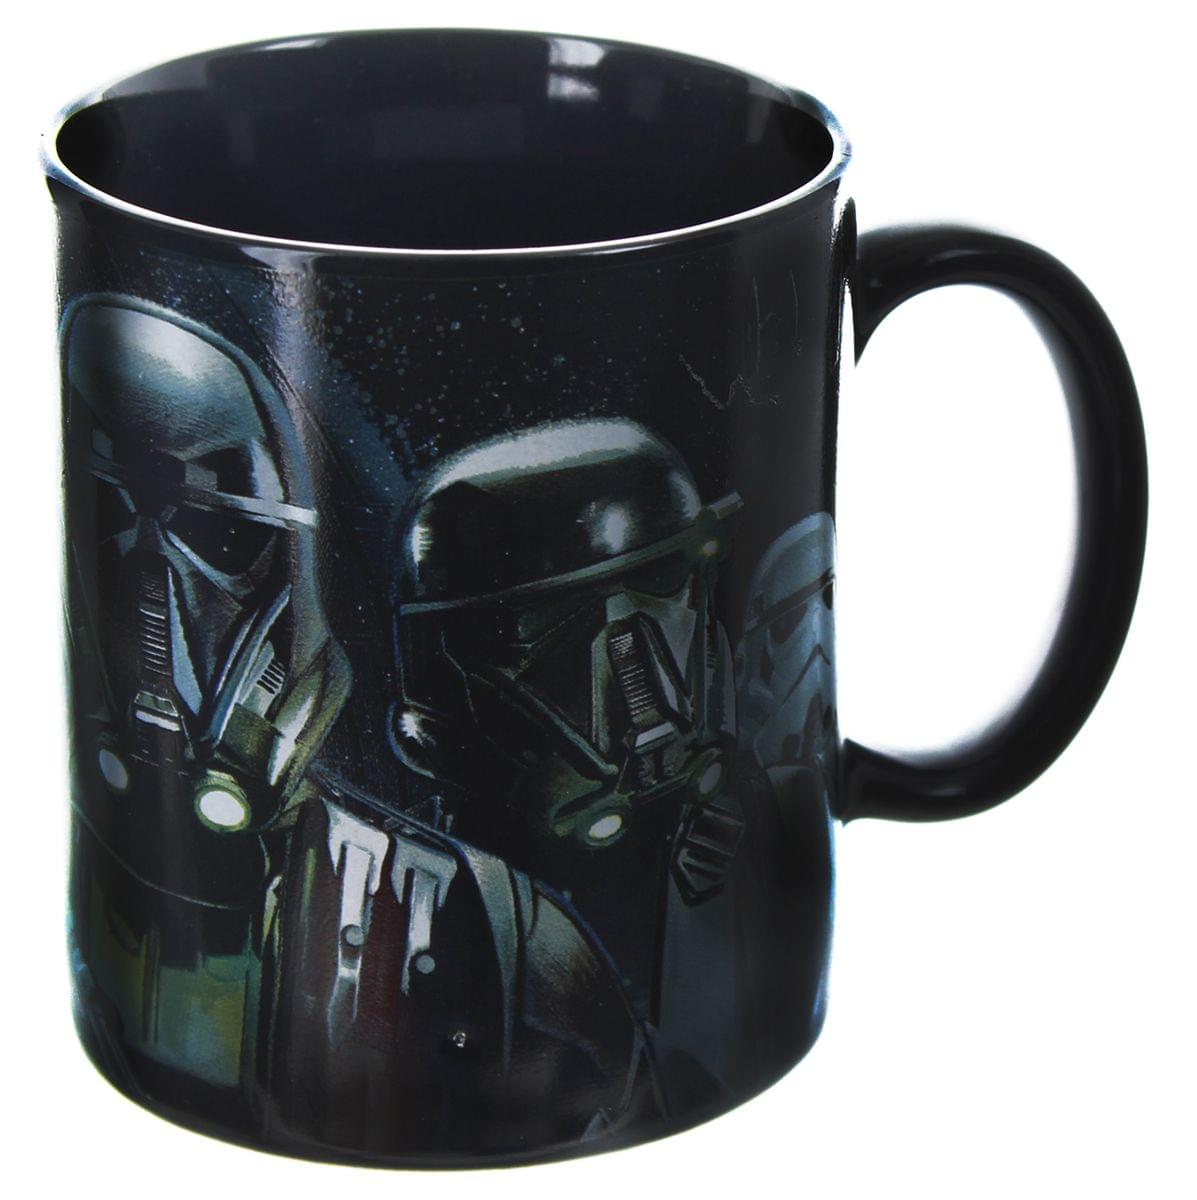 NEW STAR WARS ROGUE CERAMIC MUG AND ONE PAIR SOCKS ITS BEST GIFT IN BOX 